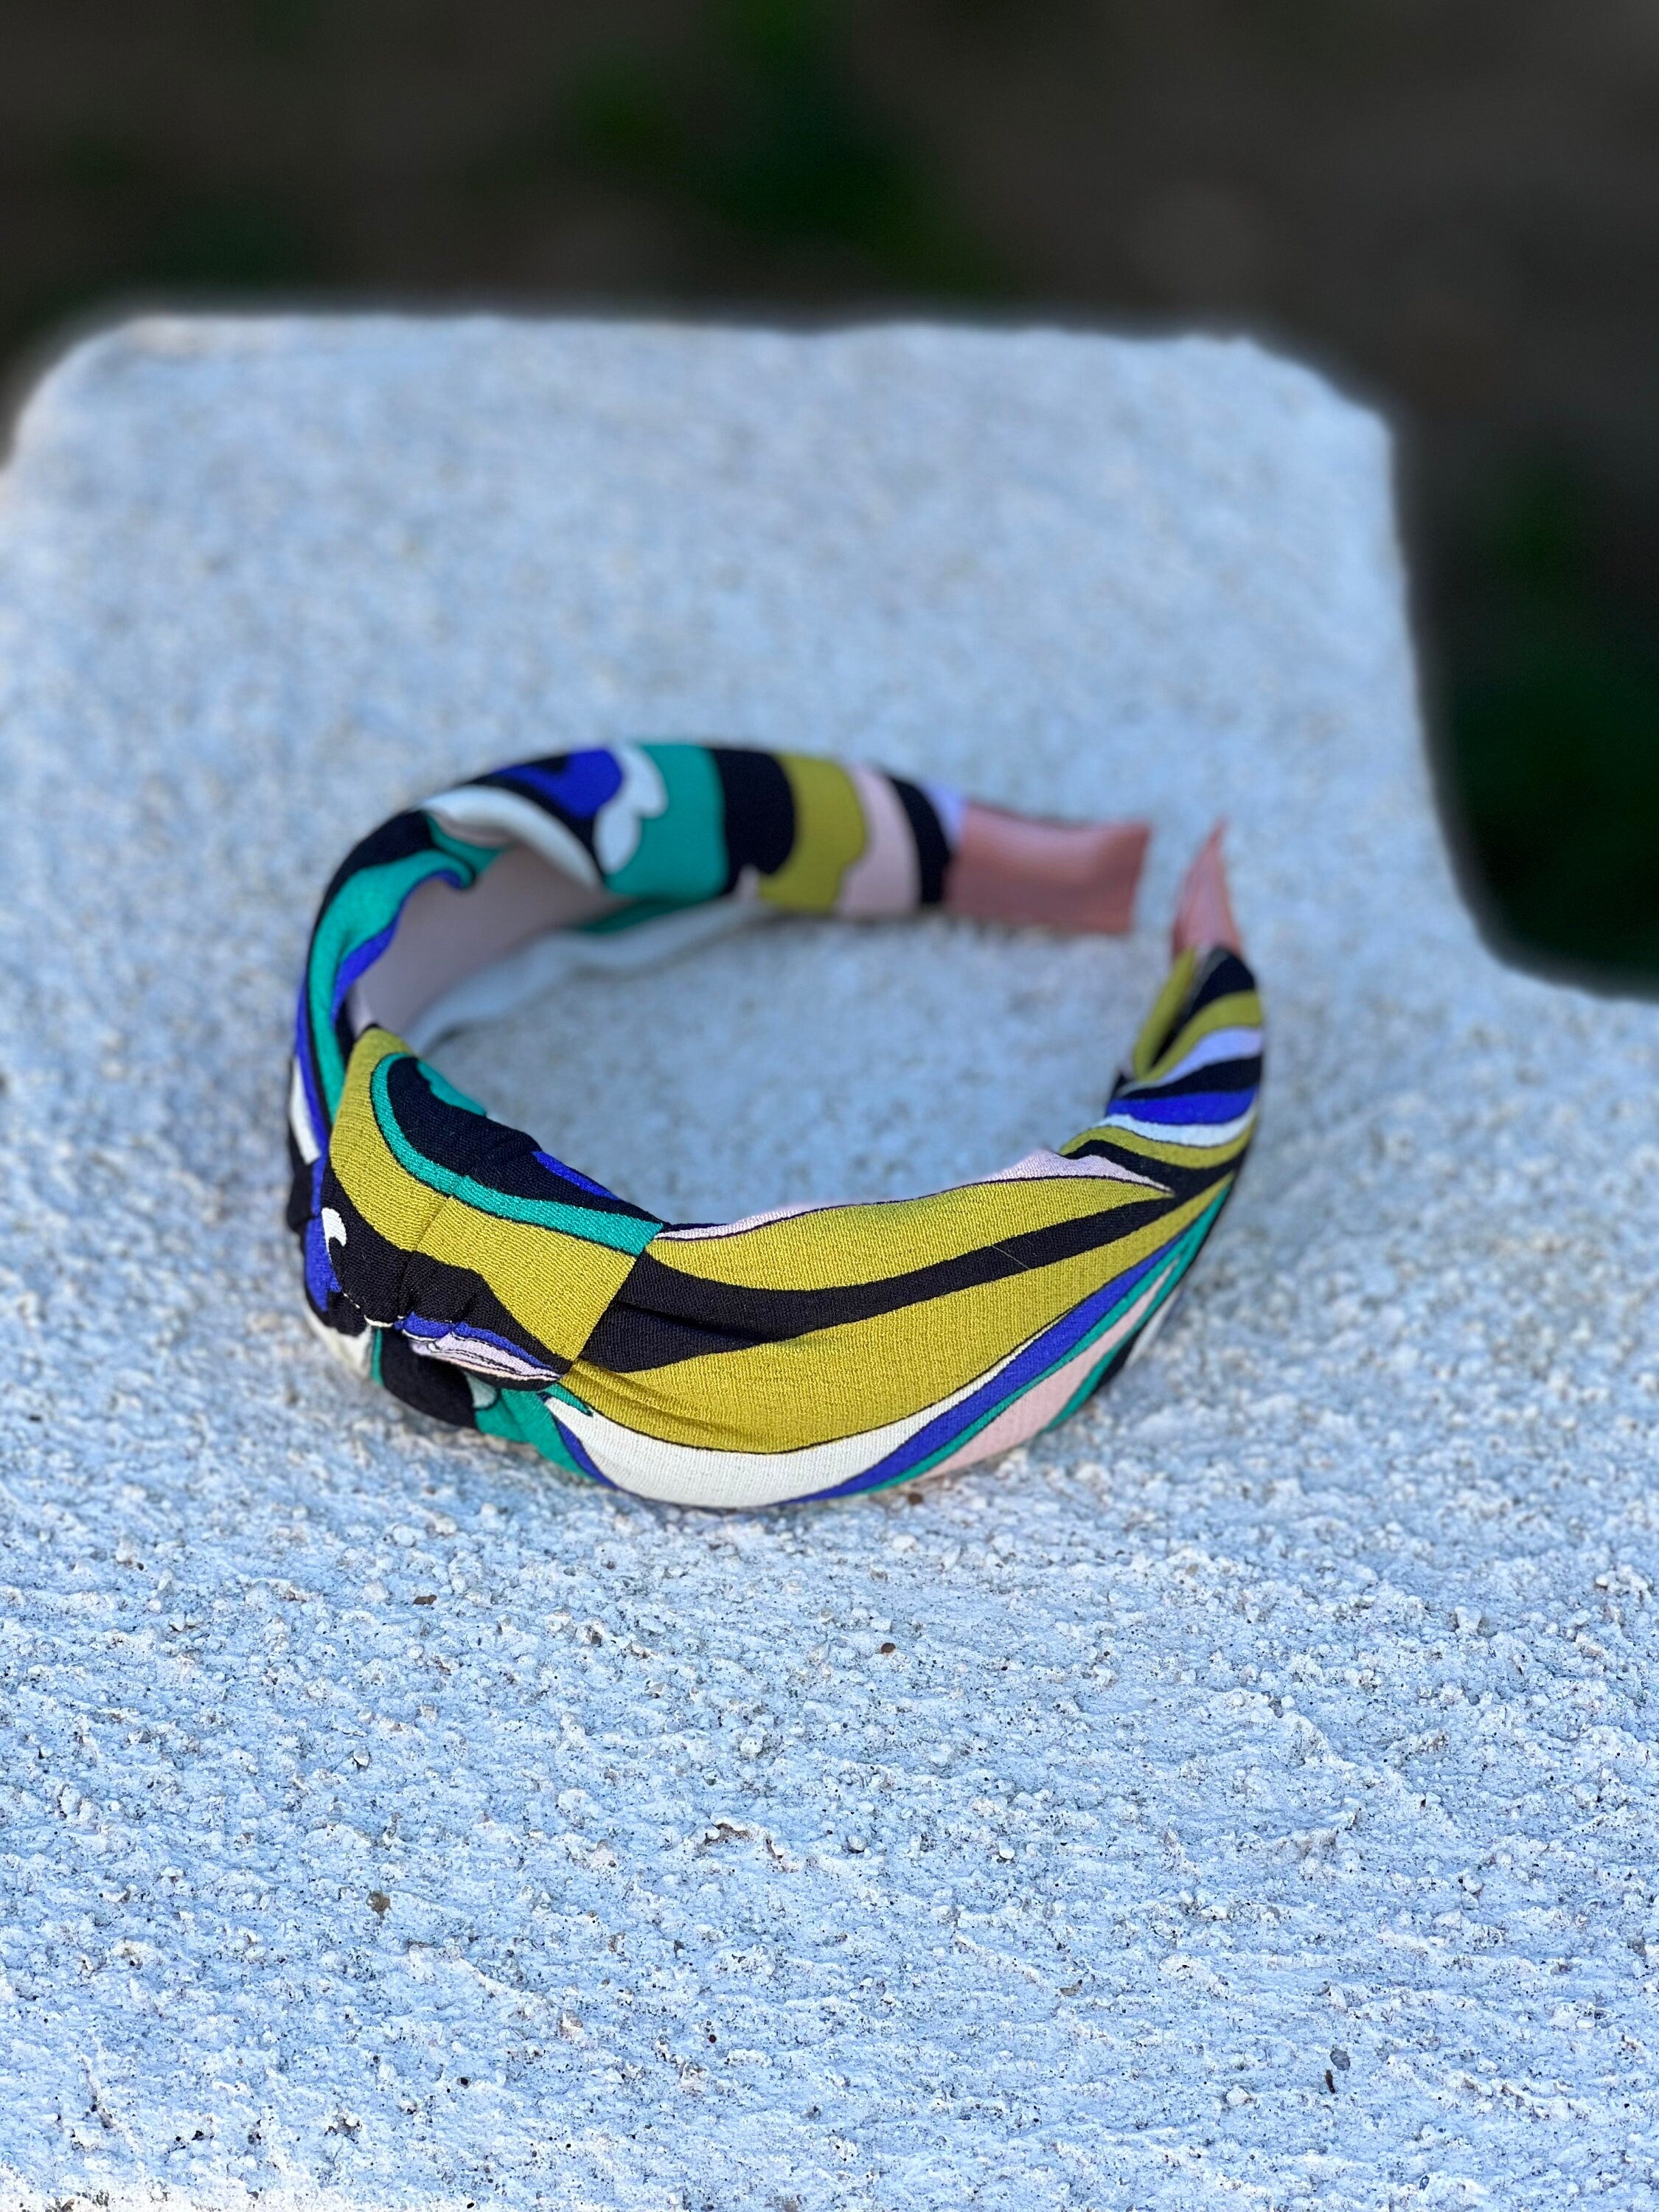 Add a pop of color to your hair with our Black White Blue Green Headband. This fashion hairband is perfect for all seasons and is made from soft and stretchy material.